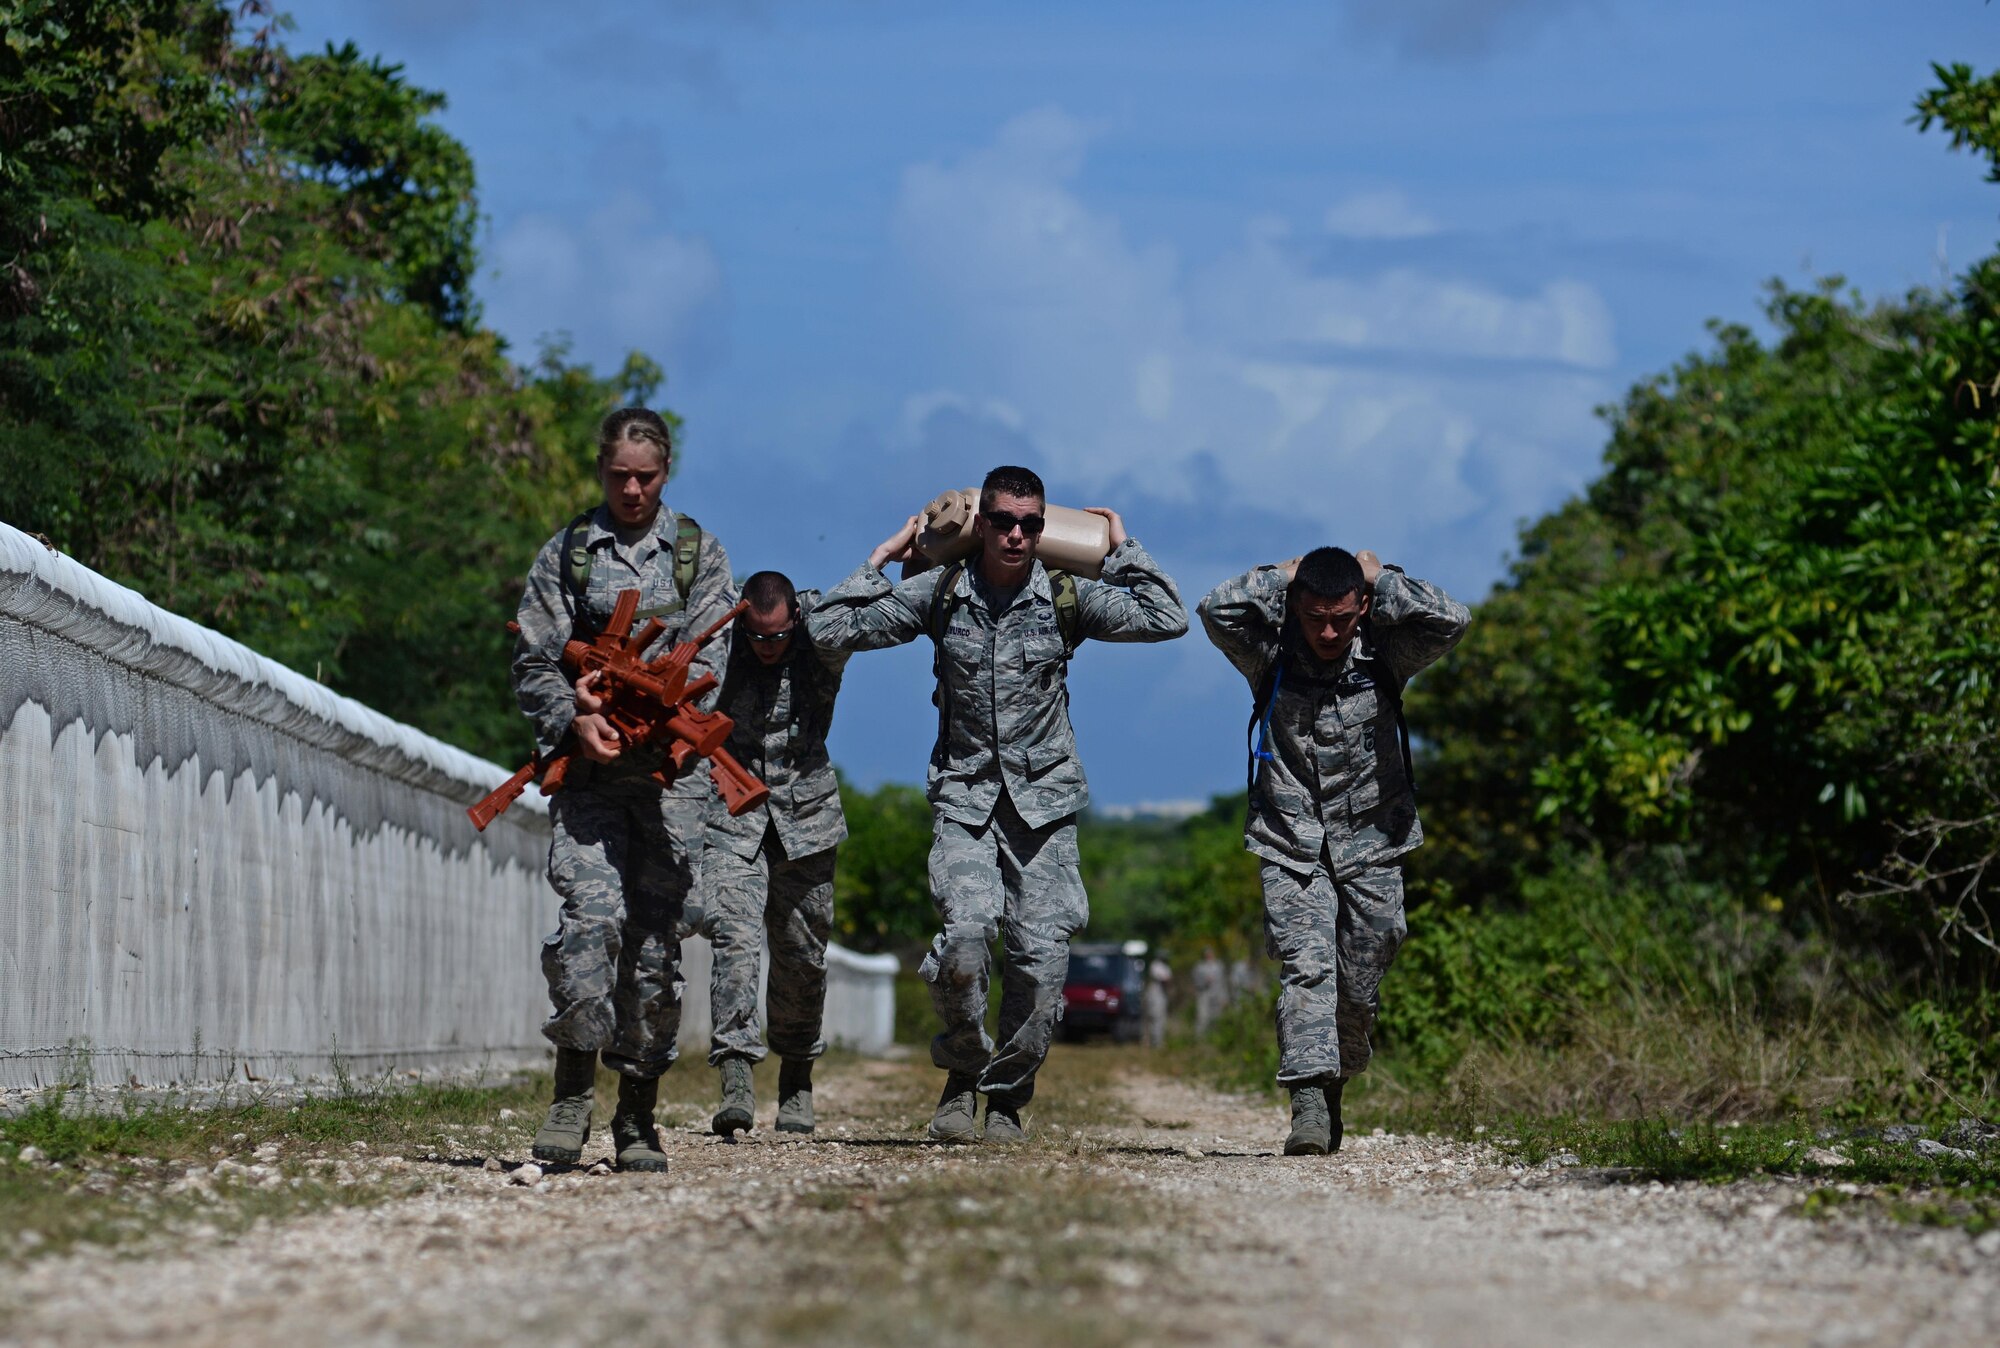 Members from the 35th Security Forces Squadron carry miscellaneous items during the second annual Security Forces Advanced Combat Skills Assessment held at the Security Forces Regional Training Center at Andersen Air Force Base, Guam, June 6, 2017. More than 100 Airmen and Soldiers throughout the U.S. Pacific Command competed in five categories including weapons, tactics, combat fitness, a mental and physical challenge and military working dogs. Each station conducted evaluations based on time to determine the best marksmen and combat tactics teams in the Pacific Air Forces security forces. The 35th SFS are the advanced Combat Skills champions. (U.S. Air Force photo by Airman 1st Class Gerald R. Willis)